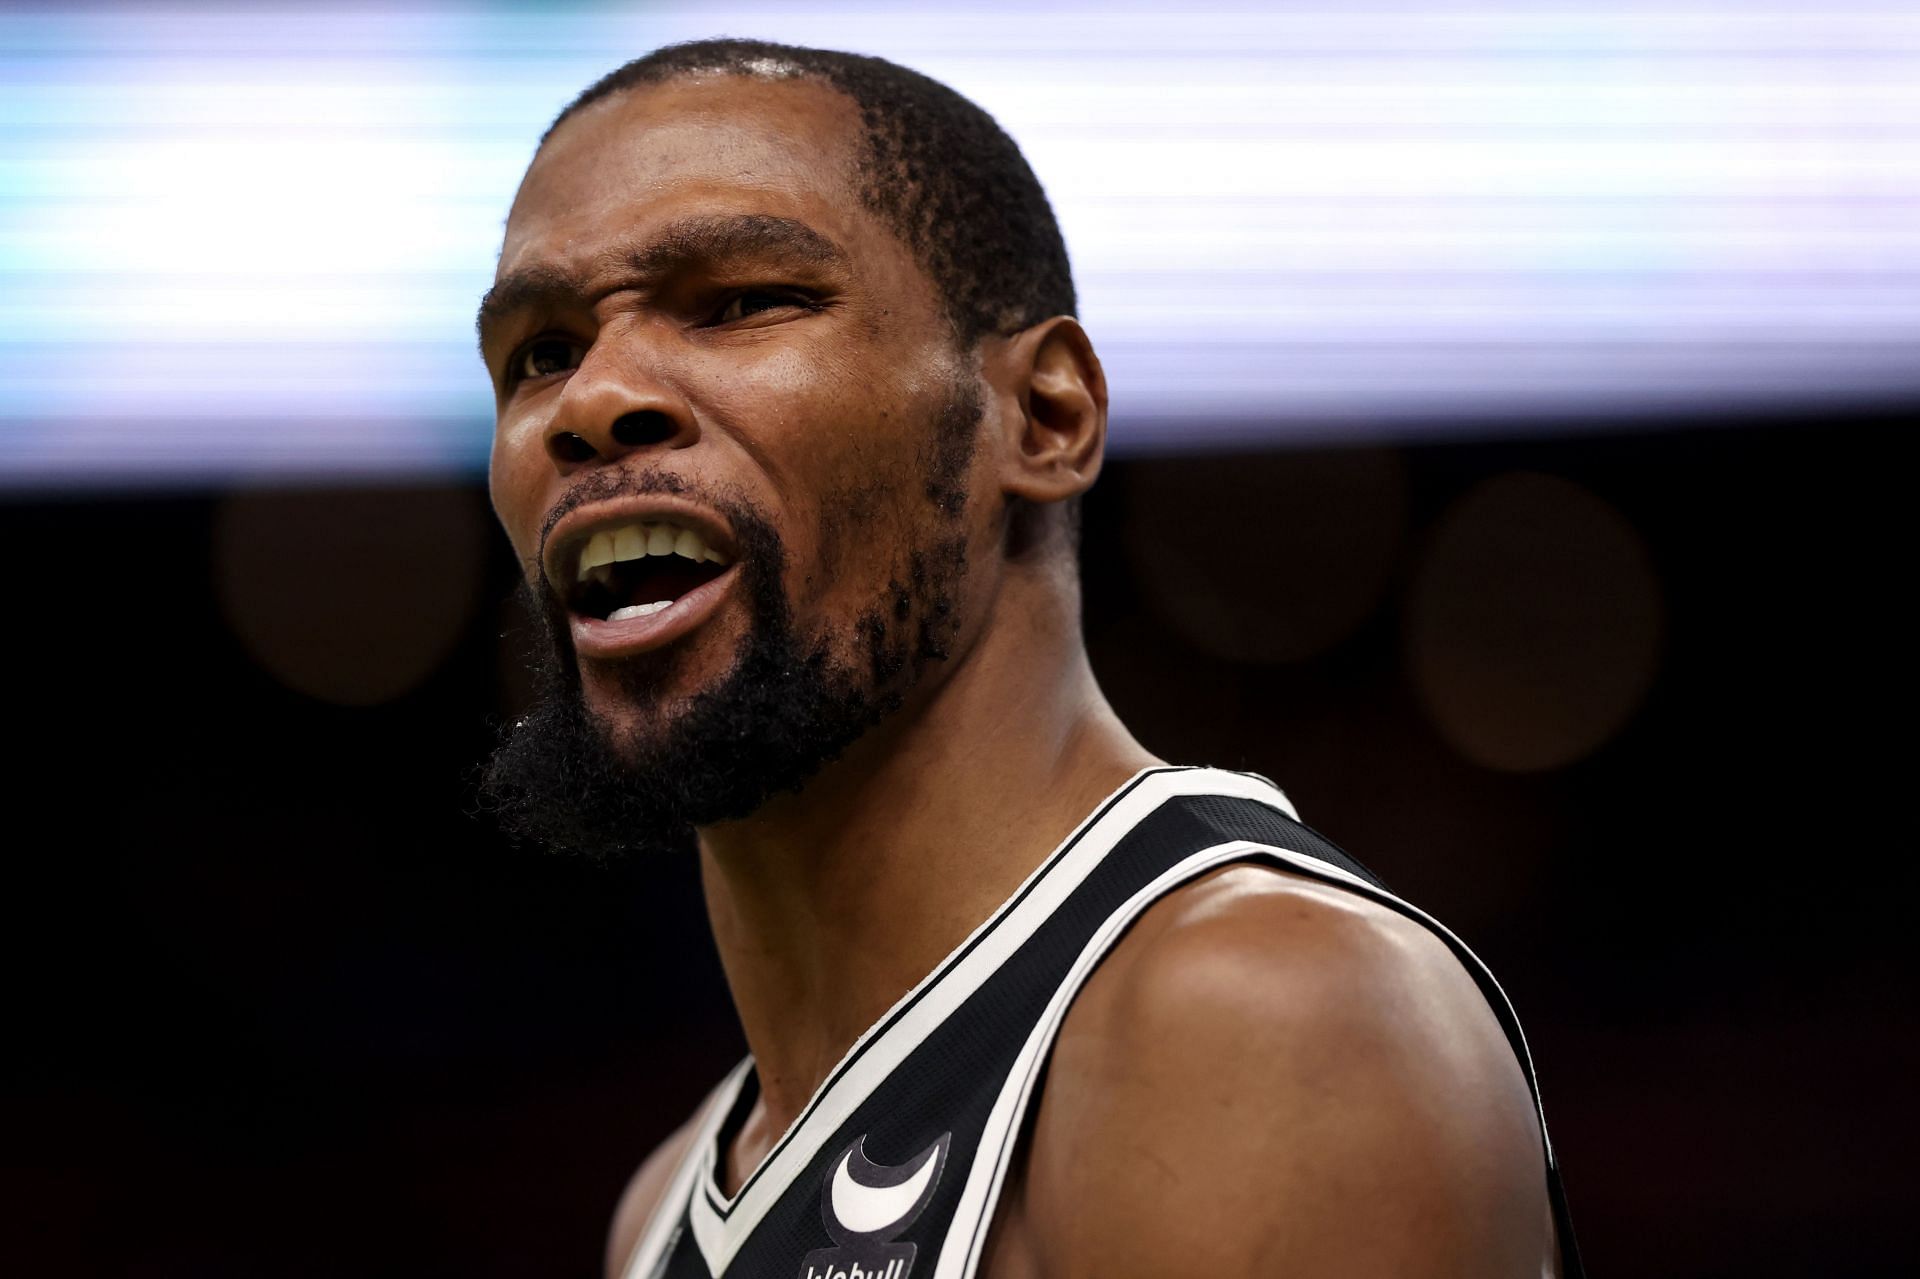 Kevin Durant of the Brooklyn Nets disputes a call during the second quarter of Game 2 of the Eastern Conference first round against the Boston Celtics on April 20 in Boston, Massachusetts